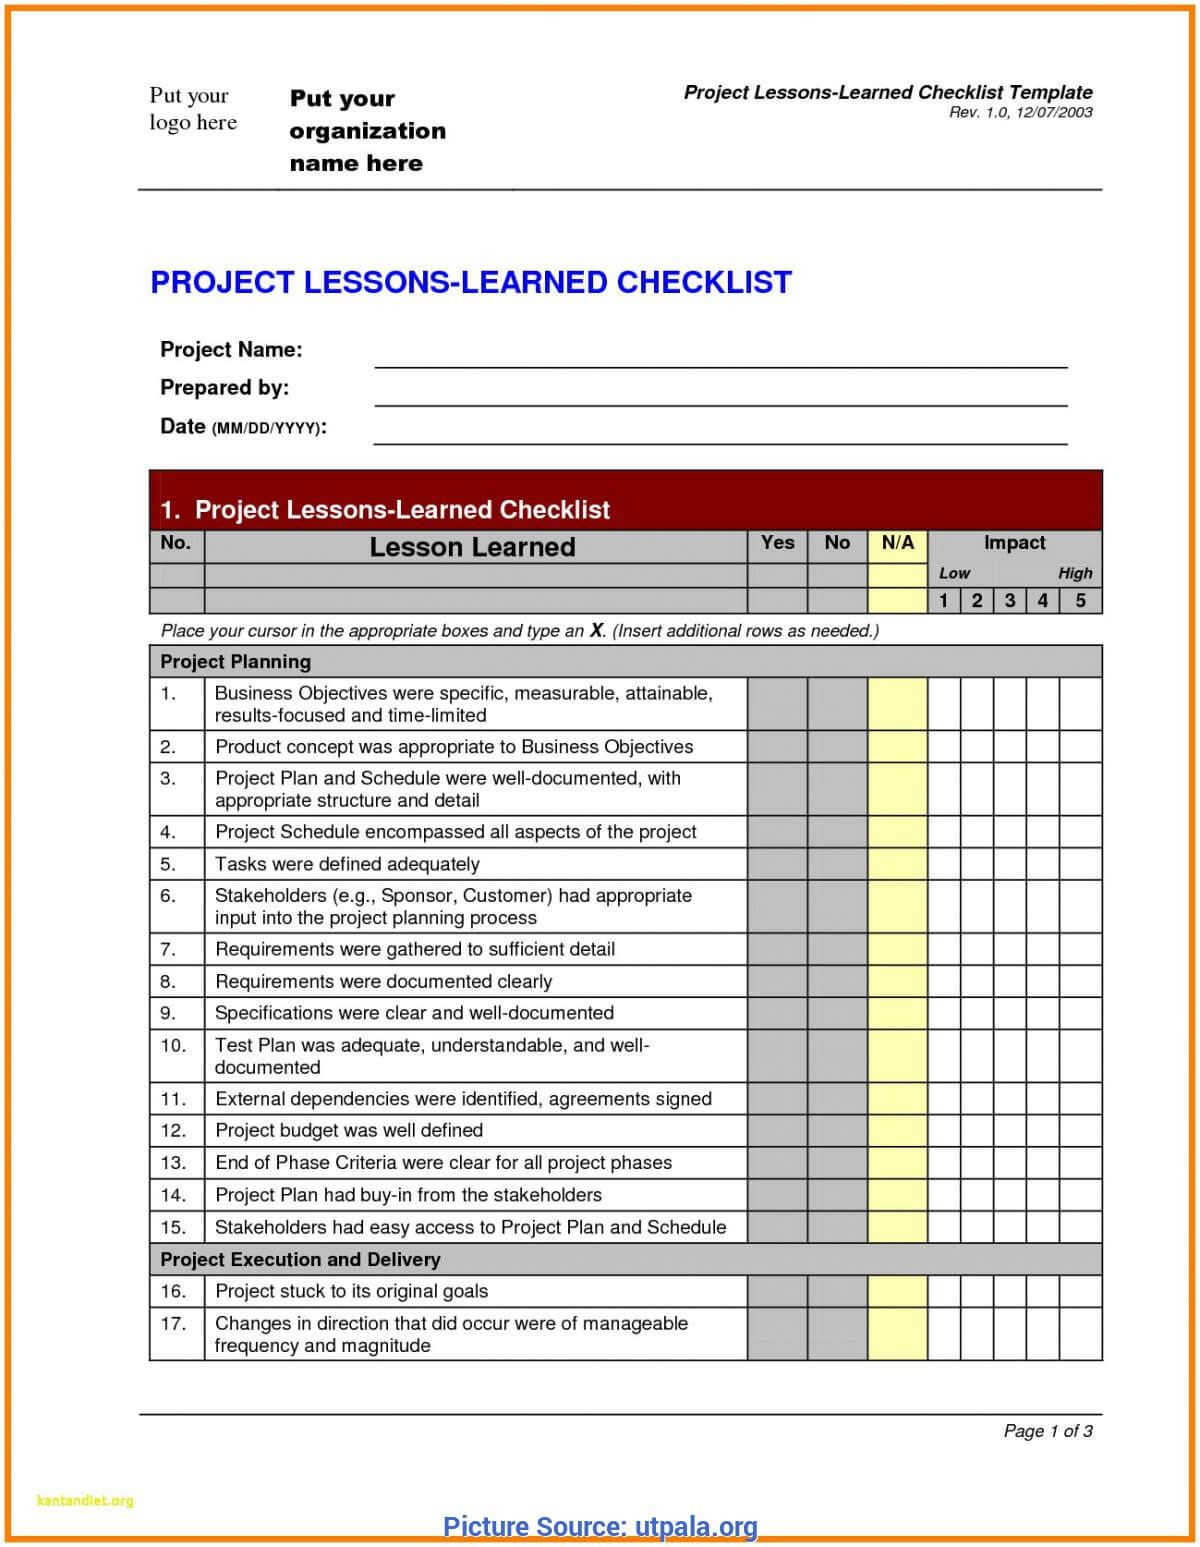 Fresh Lessons Learned Report Template Prince2 Prince2 In Prince2 Lessons Learned Report Template